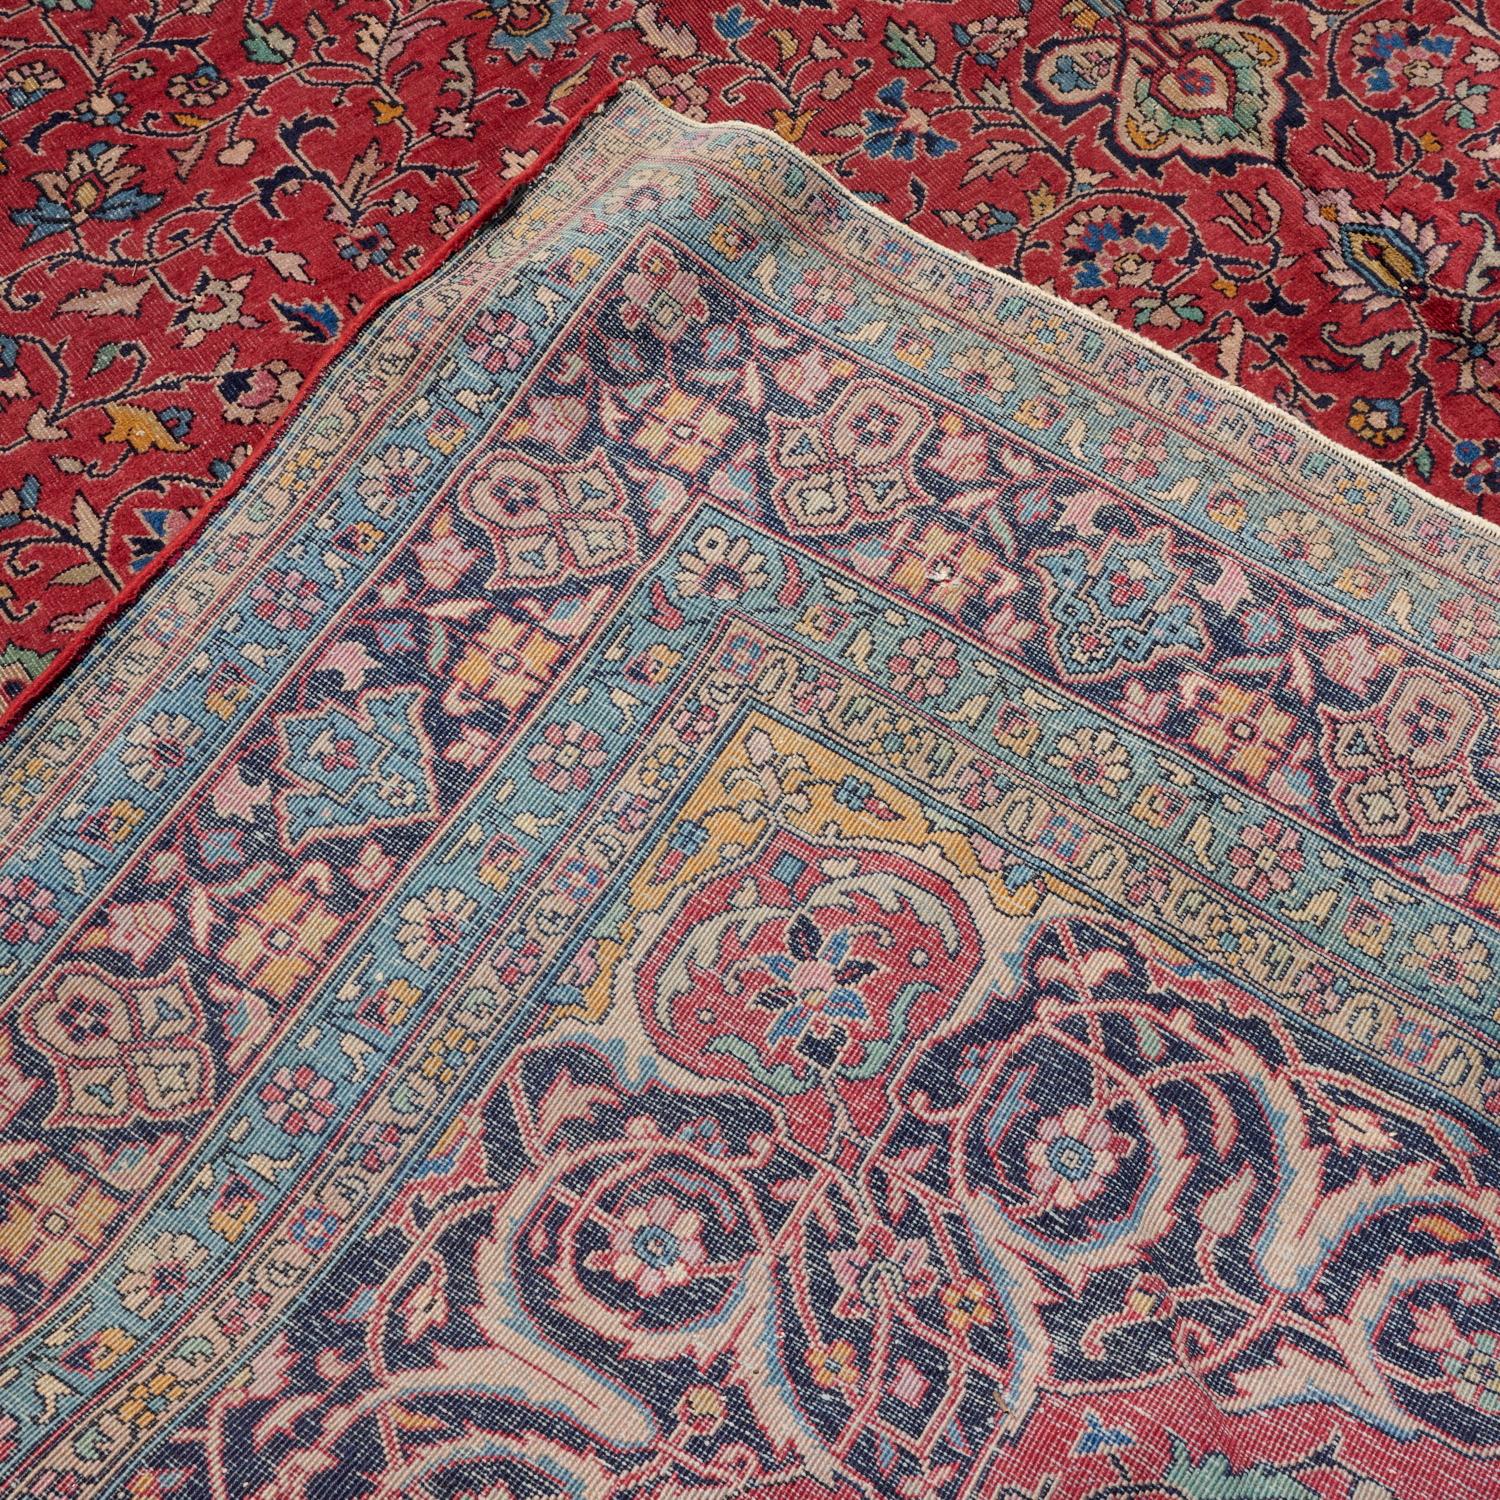 Early 20th C. Room Sized Kashan Carpet, Scrolling Floral Vines on a Red Ground For Sale 2